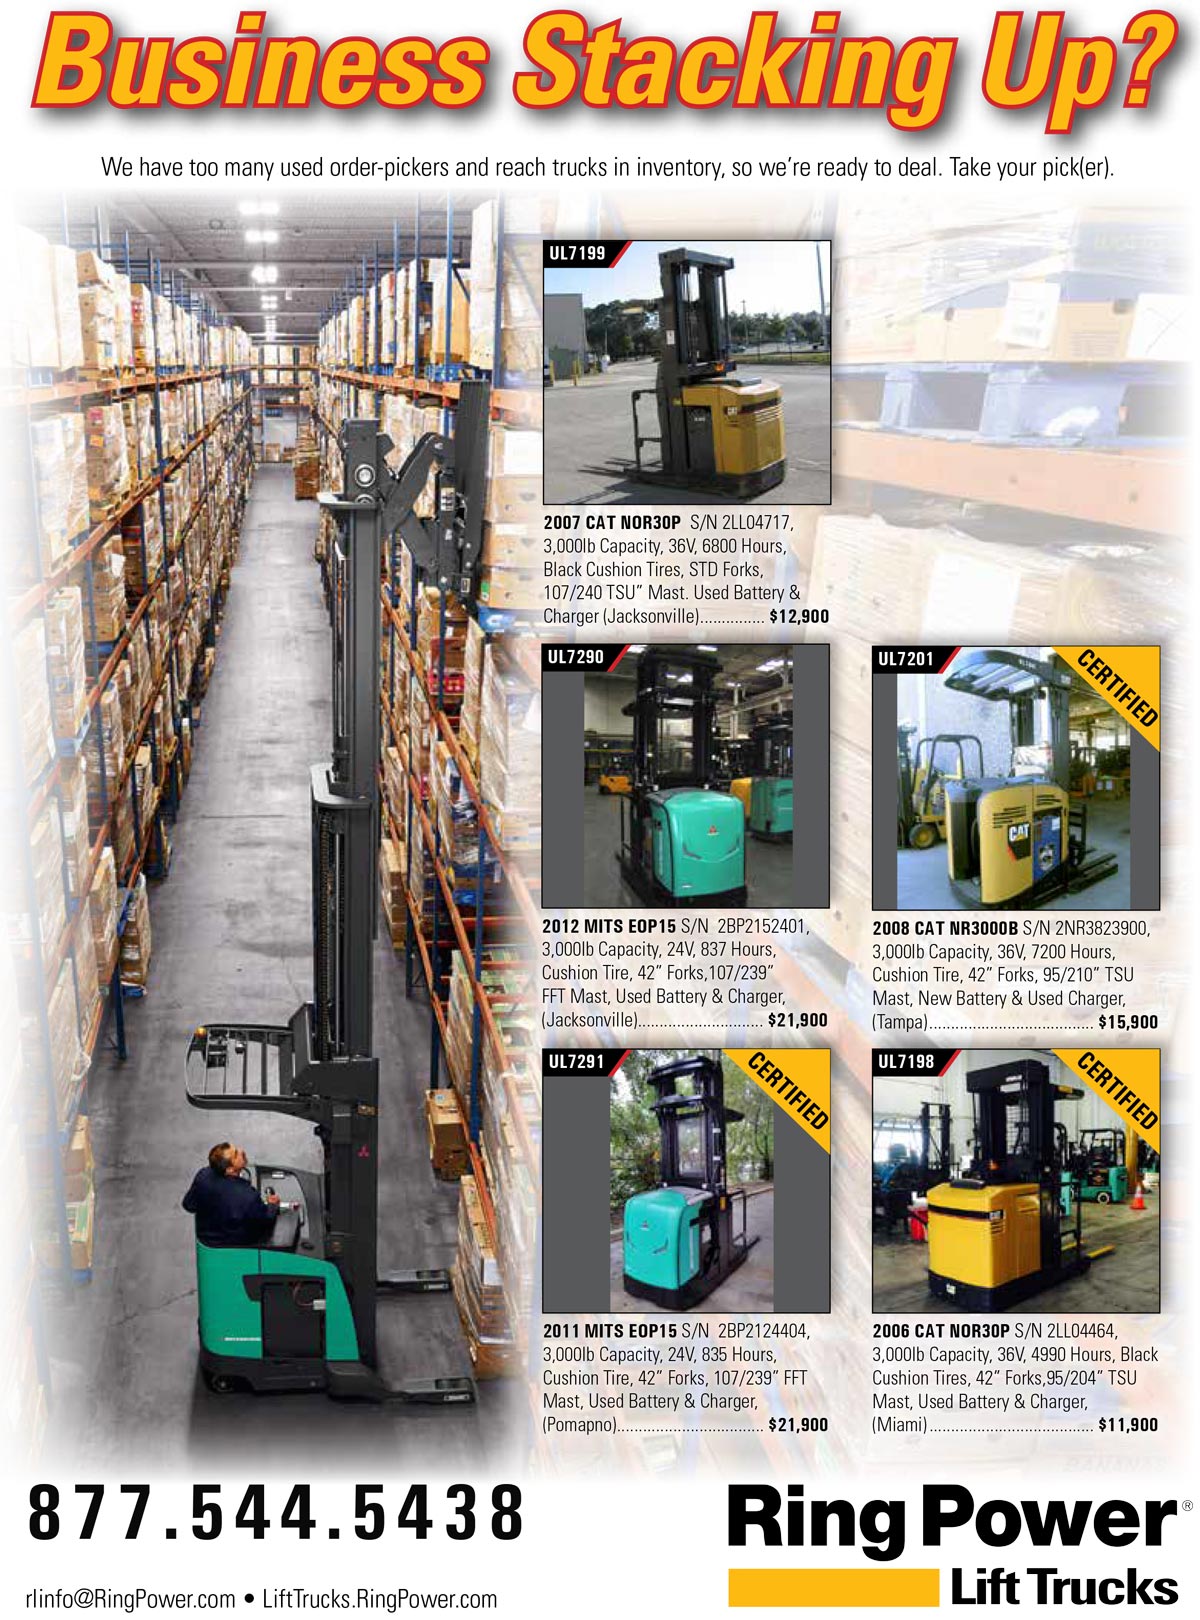 Business Stacking Up? Consider a used warehouse forklift